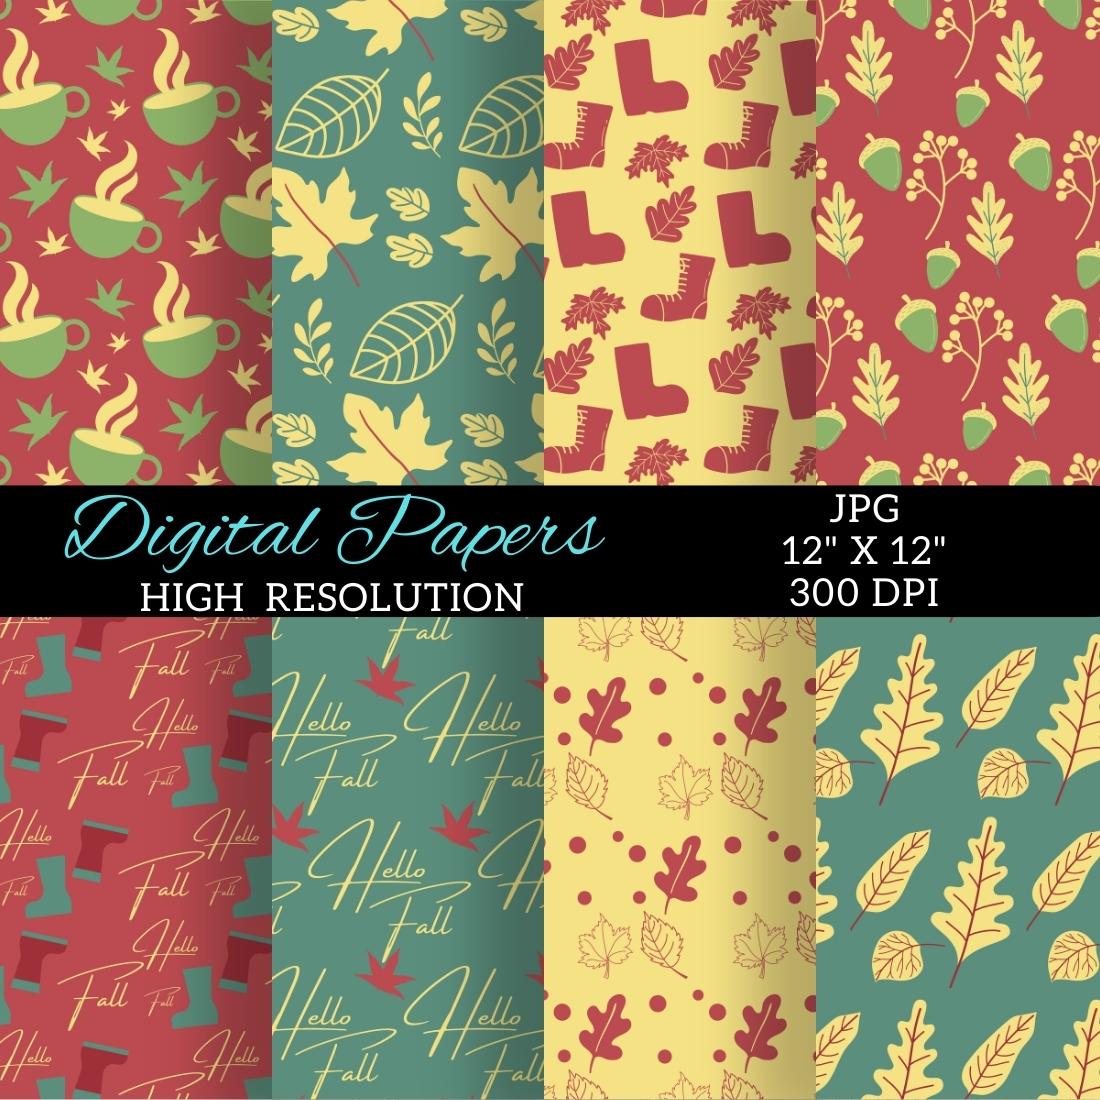 A pack of gorgeous autumn-themed background patterns.